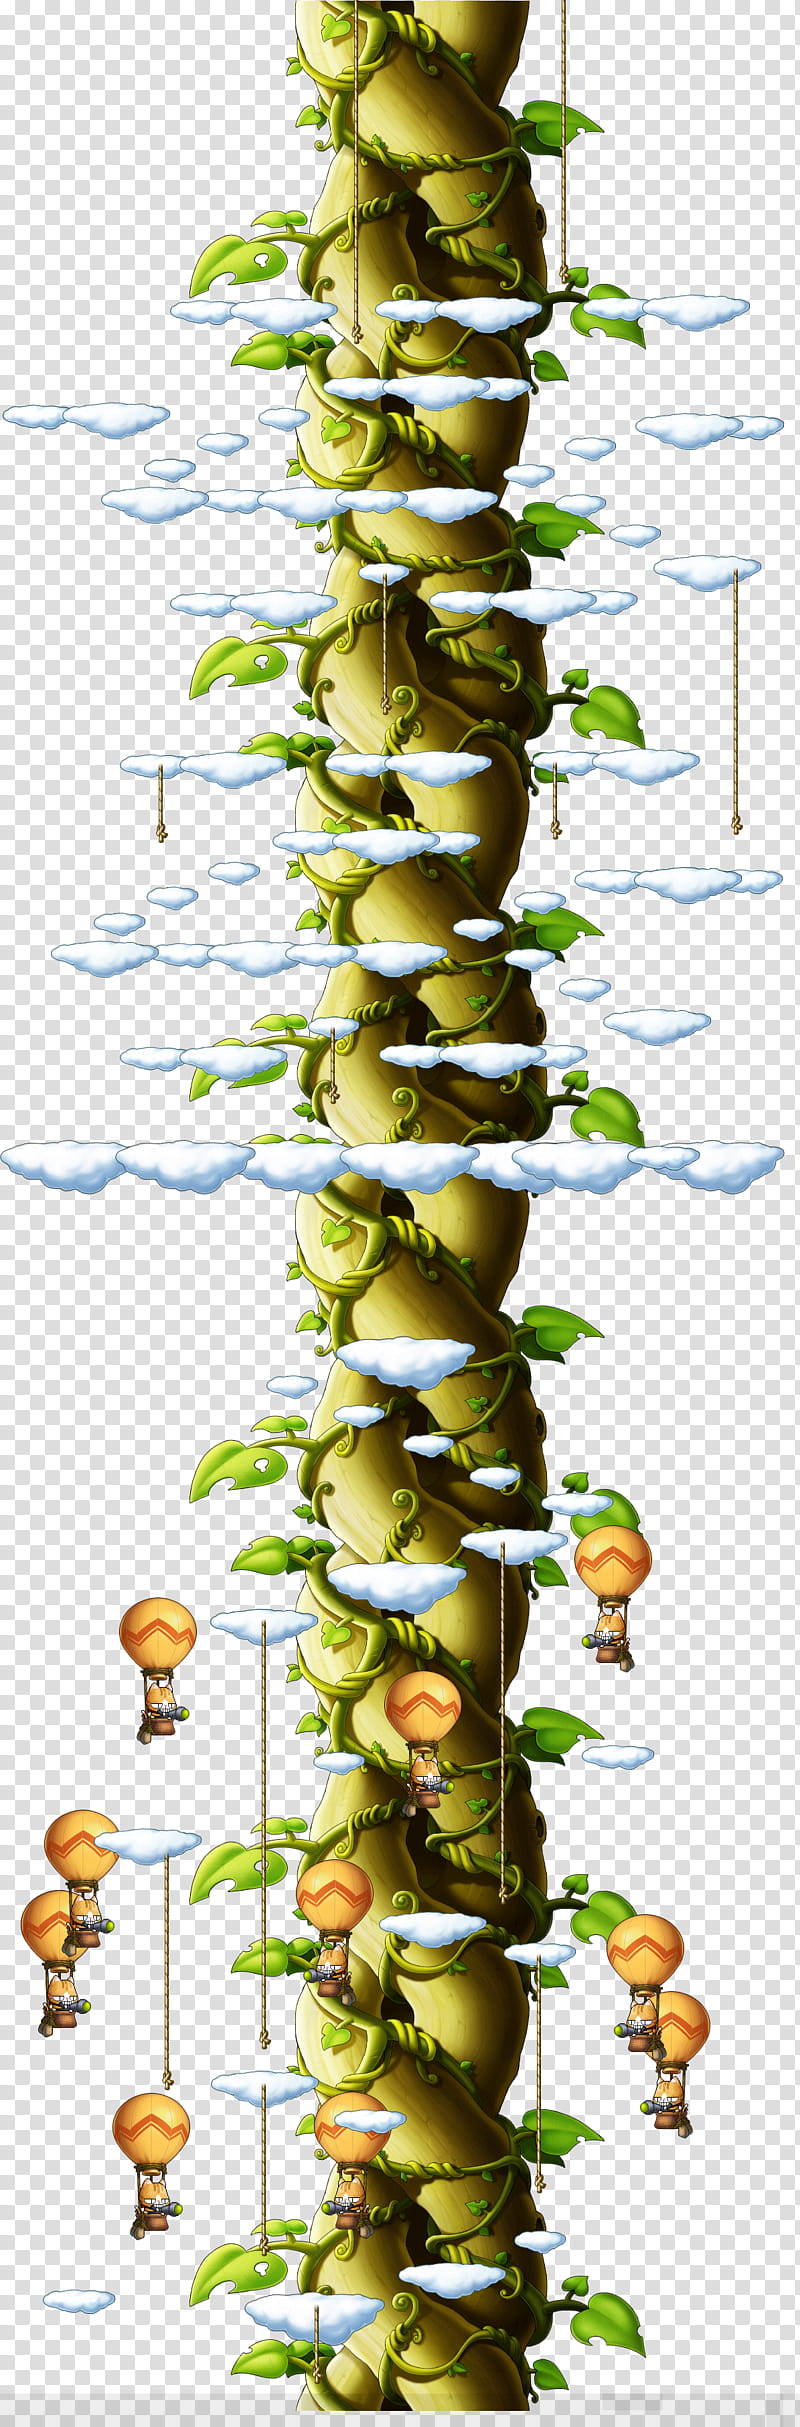 Green Leaf, Green Pea, Plant Stem, Jack And The Beanstalk, Flower, Tree, Branch transparent background PNG clipart